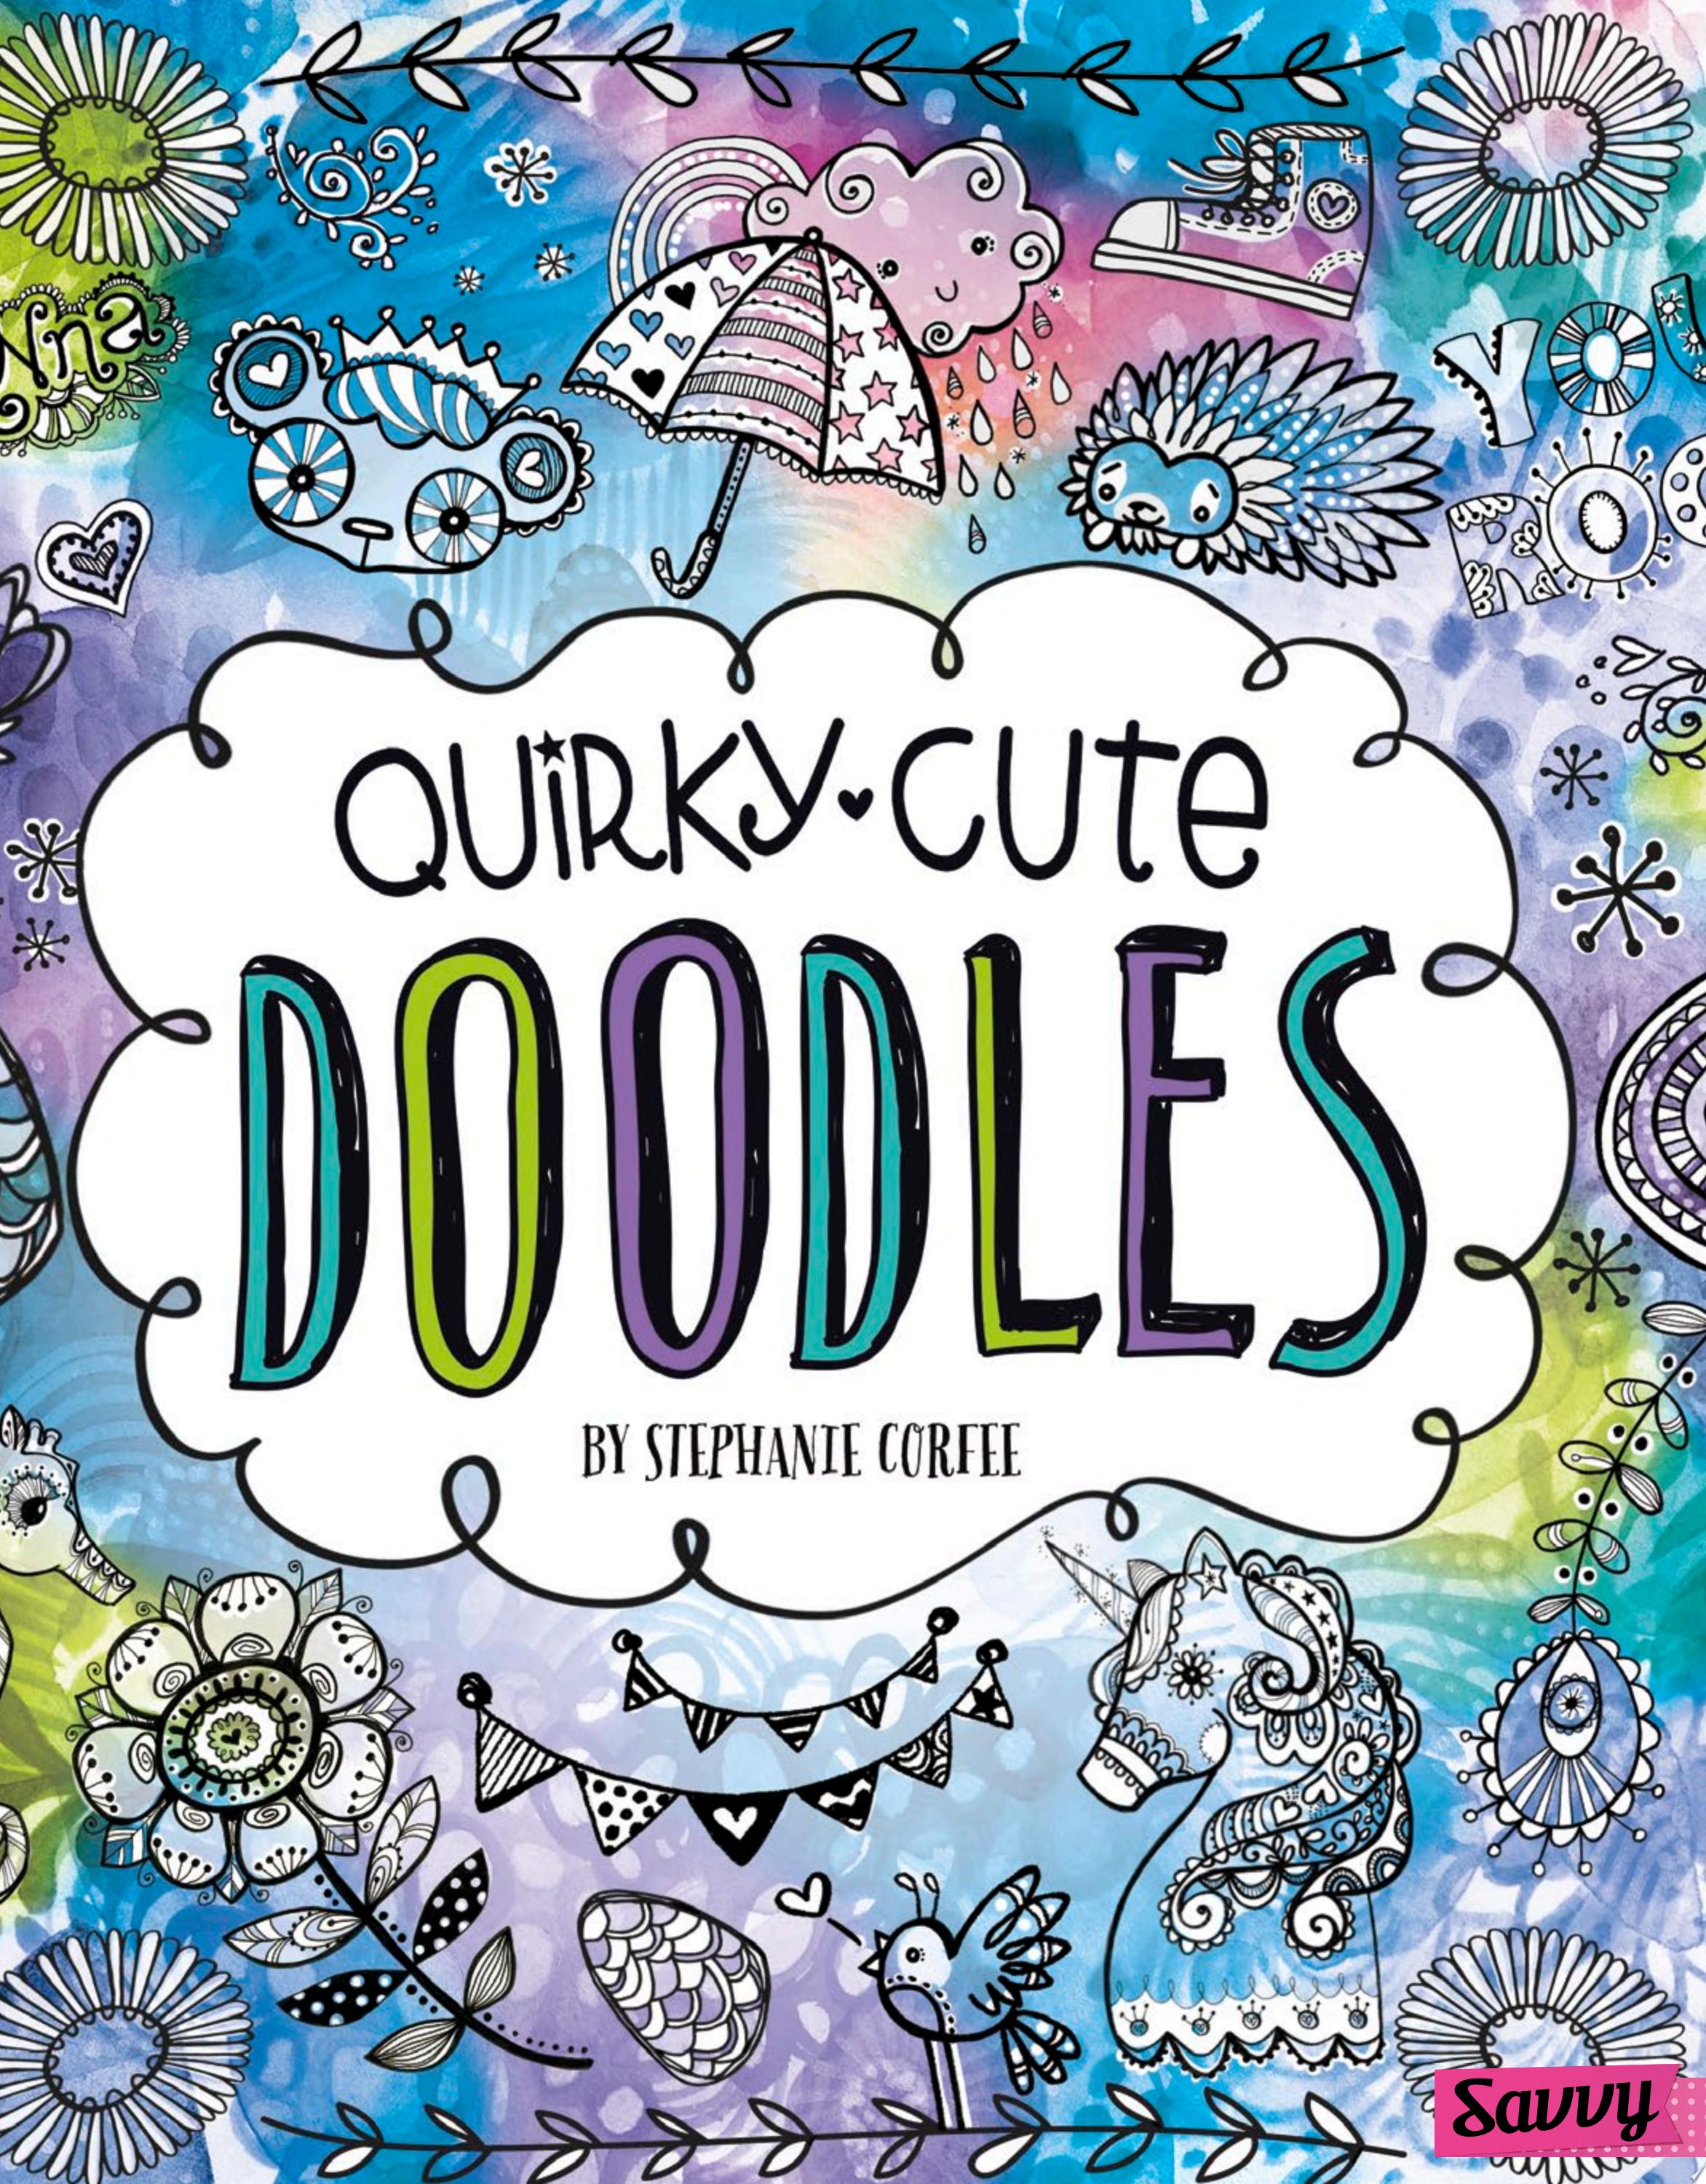 Image for "Quirky, Cute Doodles"